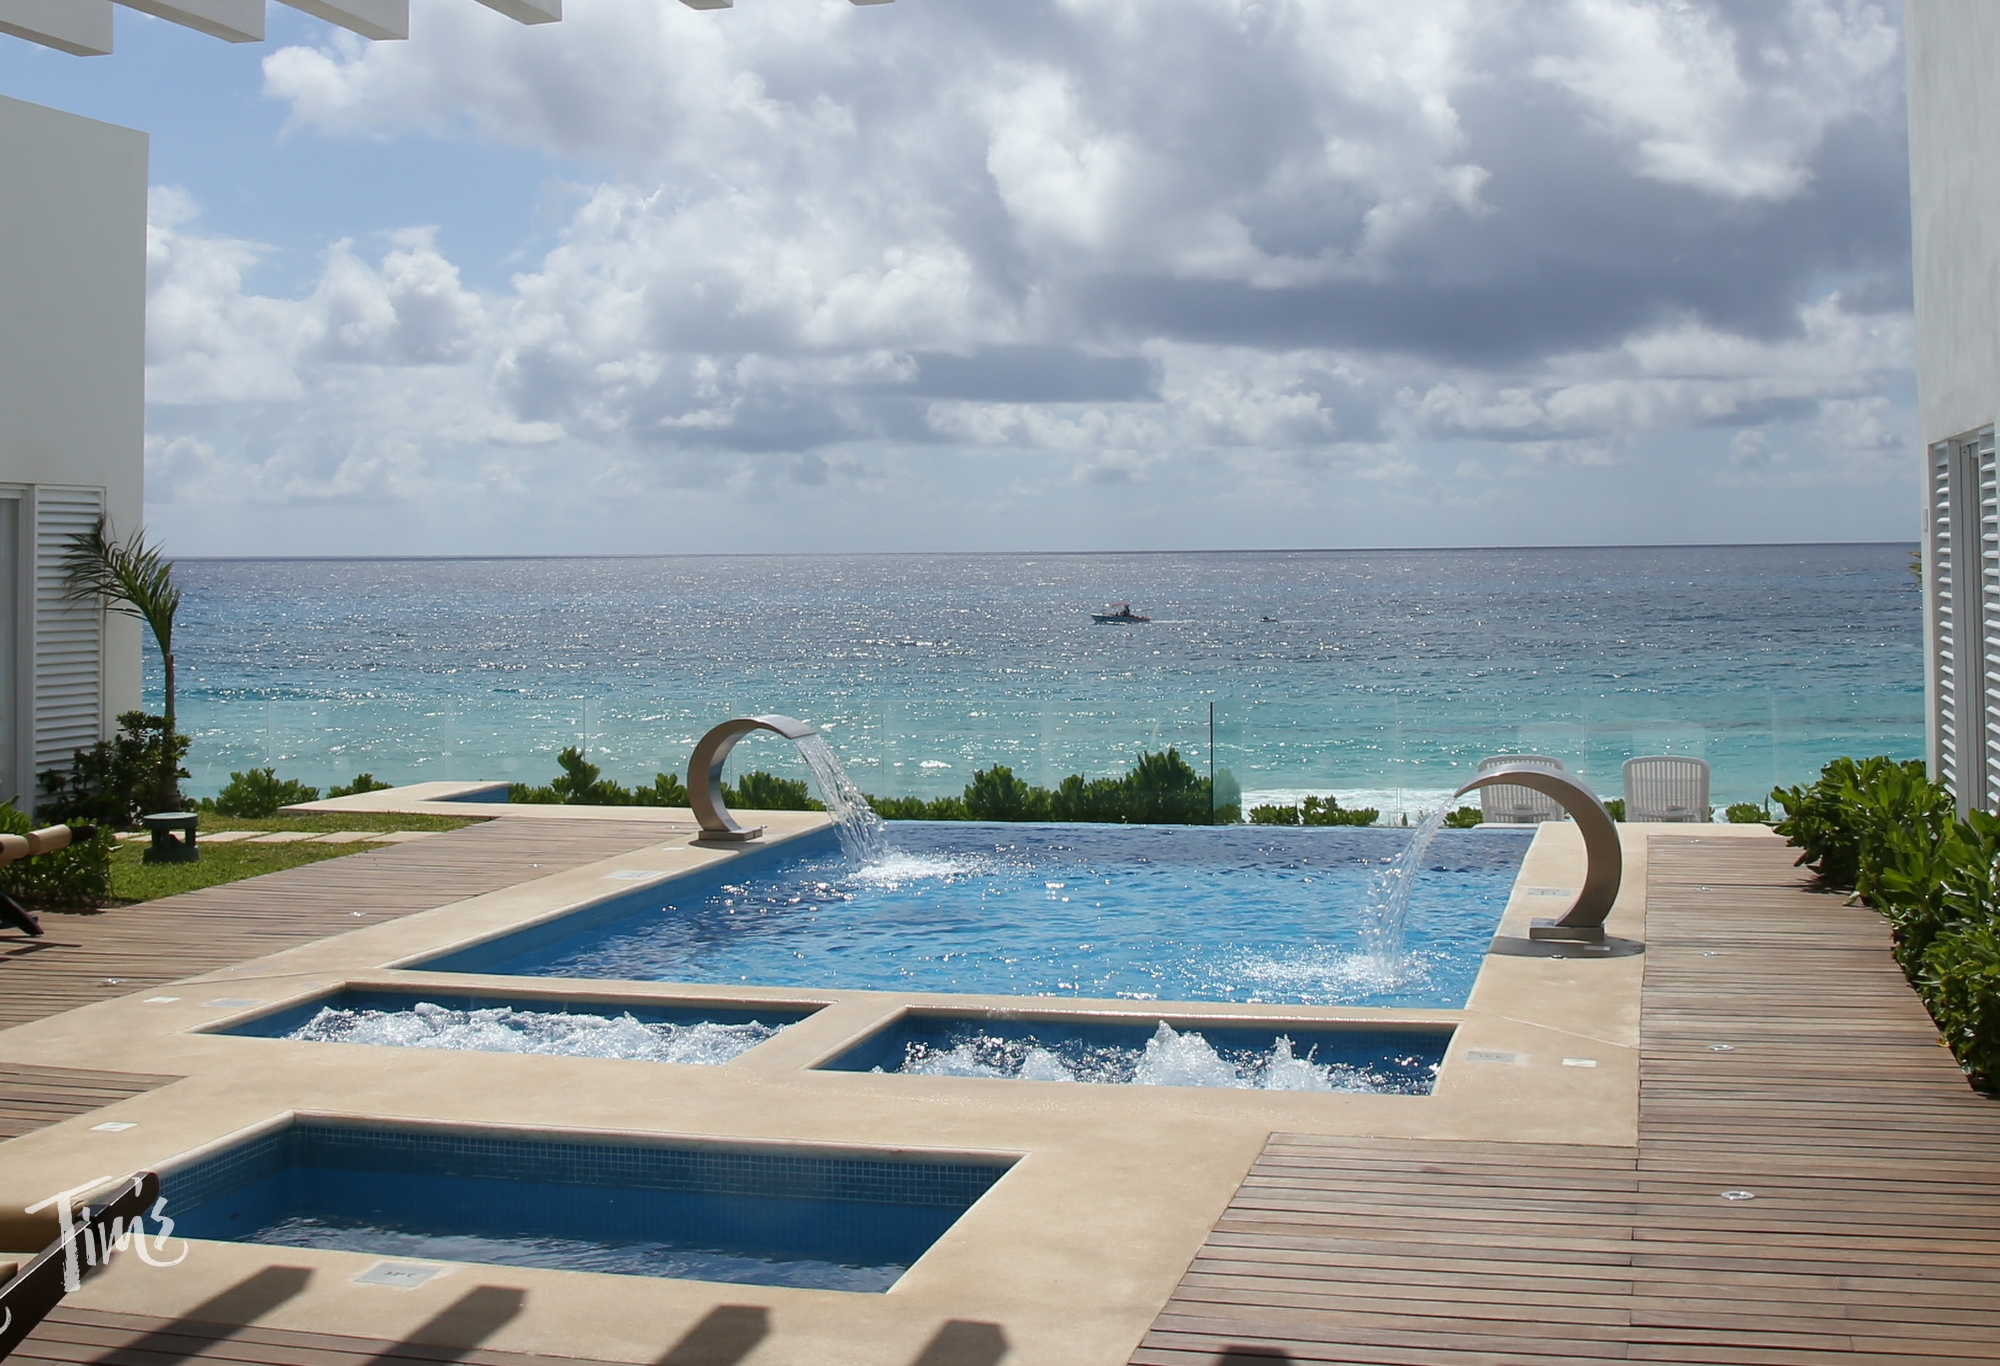 The Ludic Pool located at NUUP SPA in Cancun